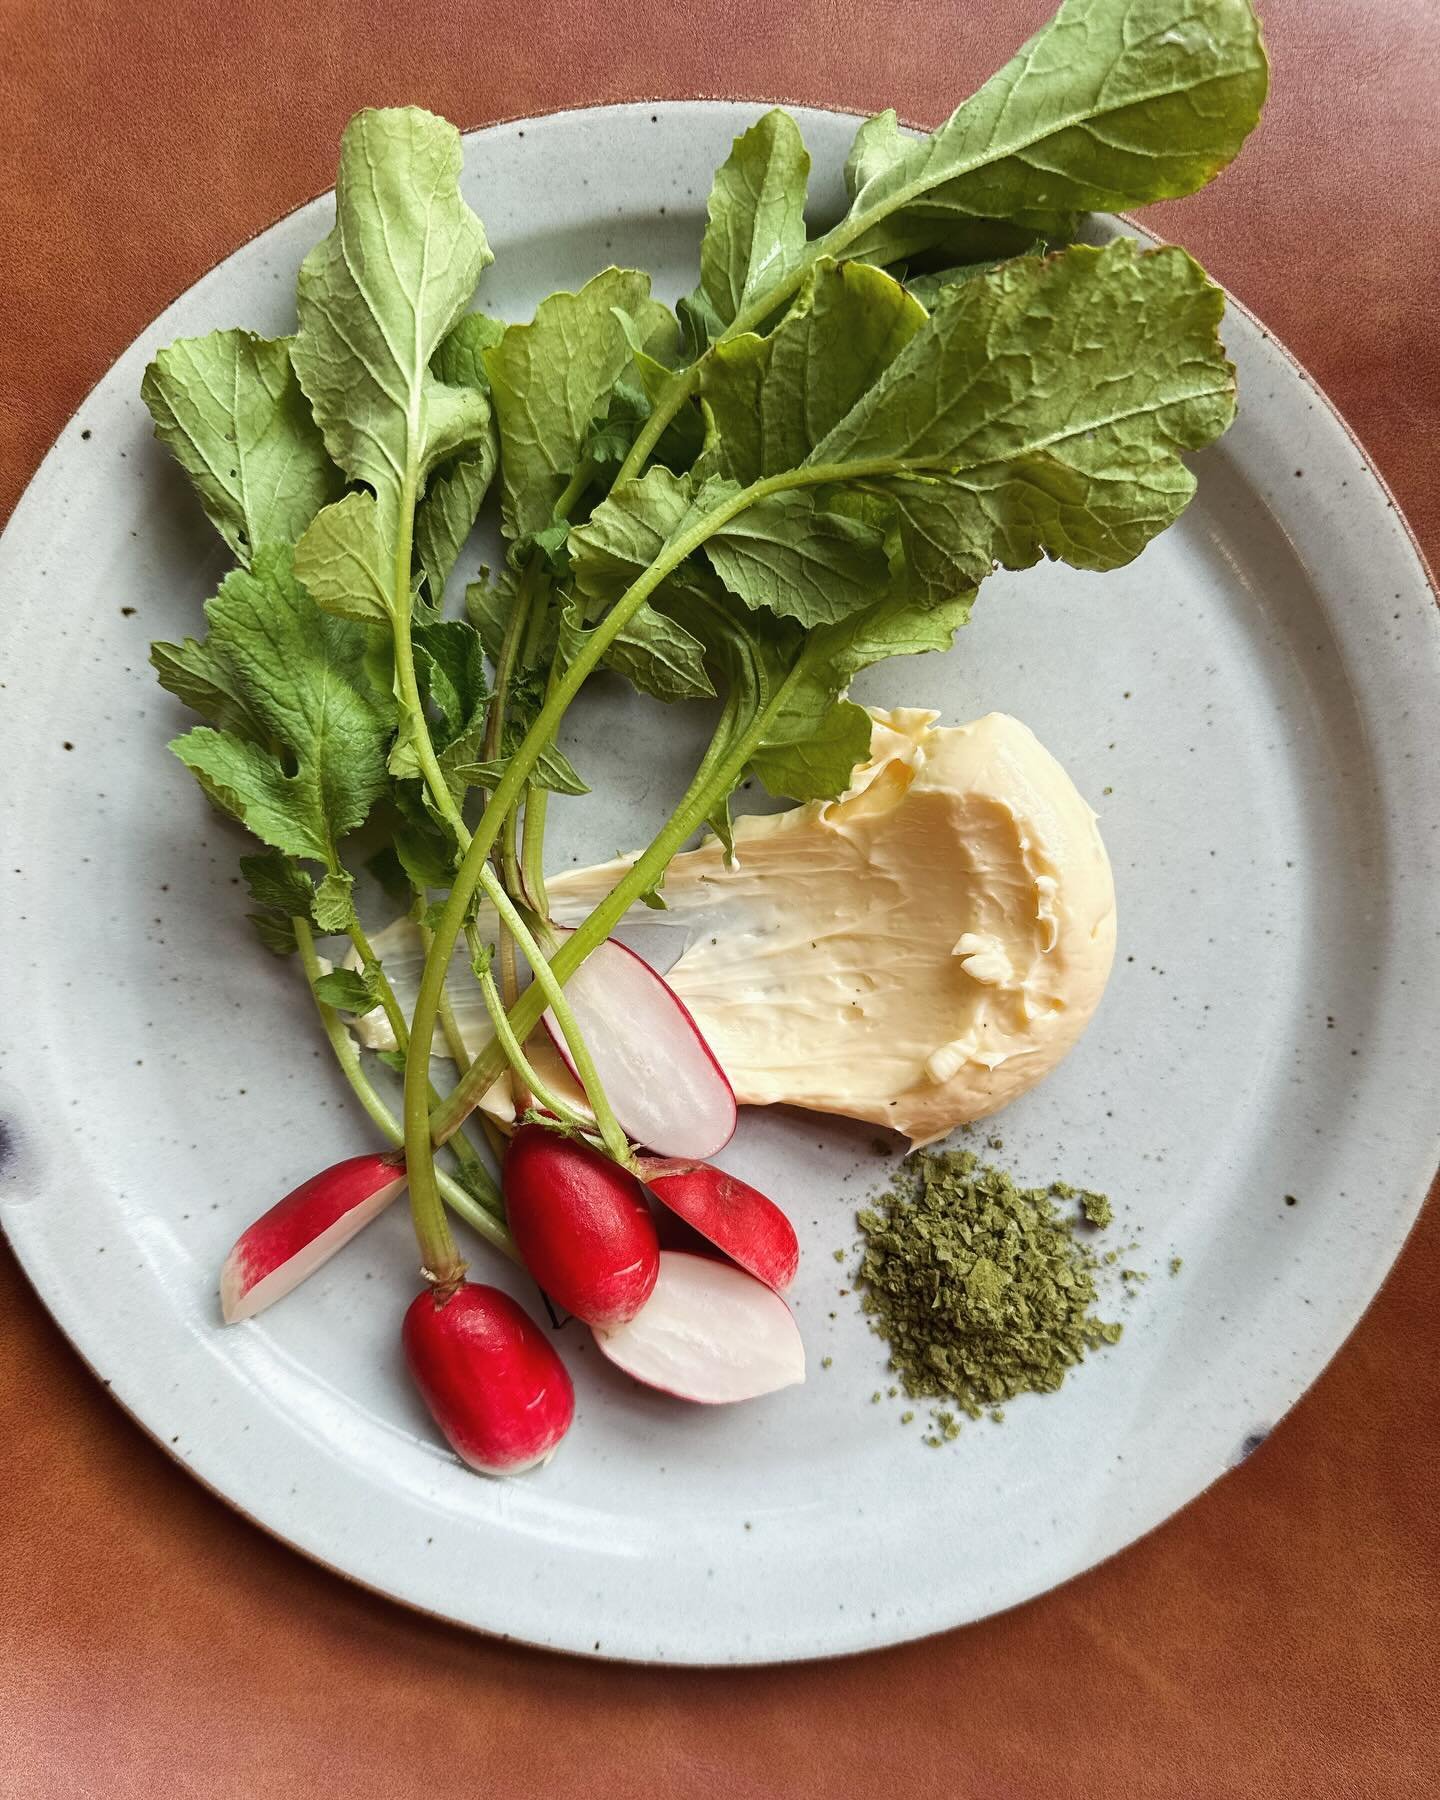 Chef Porter is a Radish + Butter Boy.
So we joyfully present this dish to you.
@darkwoodfarmer breakfast radishes with whipped butter and housemade ramp salt. 
Yes you should get it to start, and yes you should get some bread too.